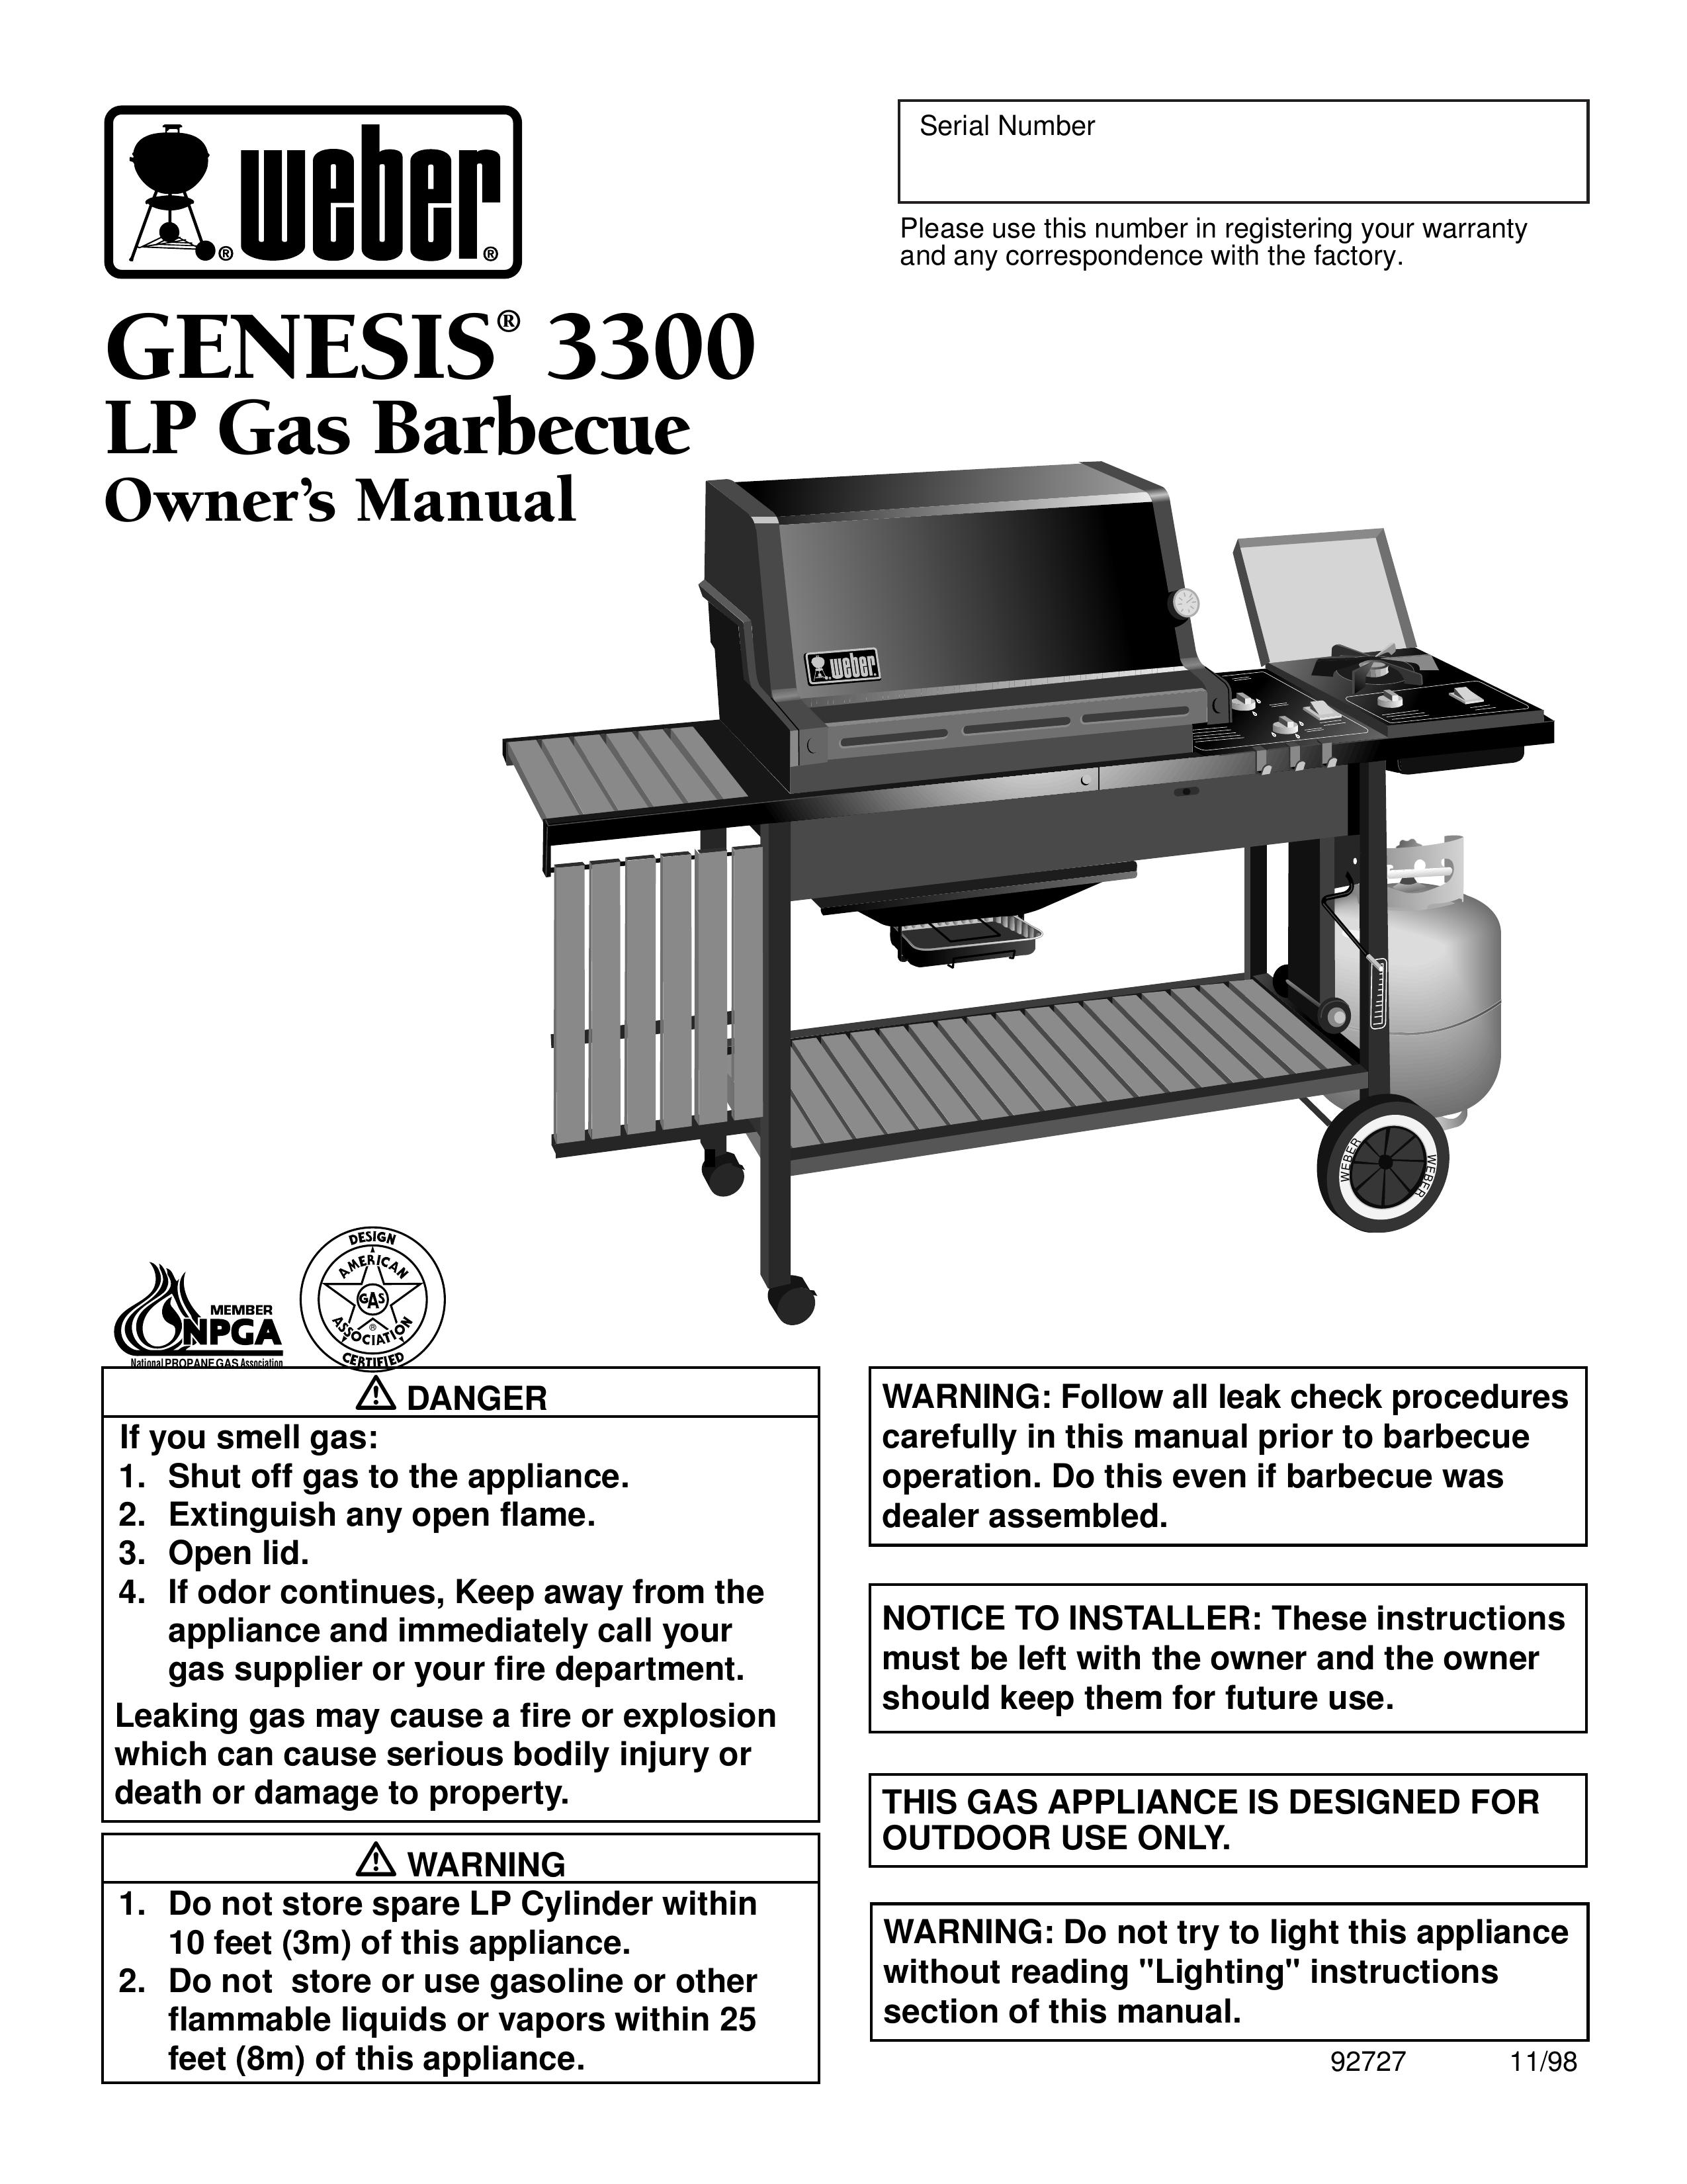 Weber 3300 Gas Grill User Manual